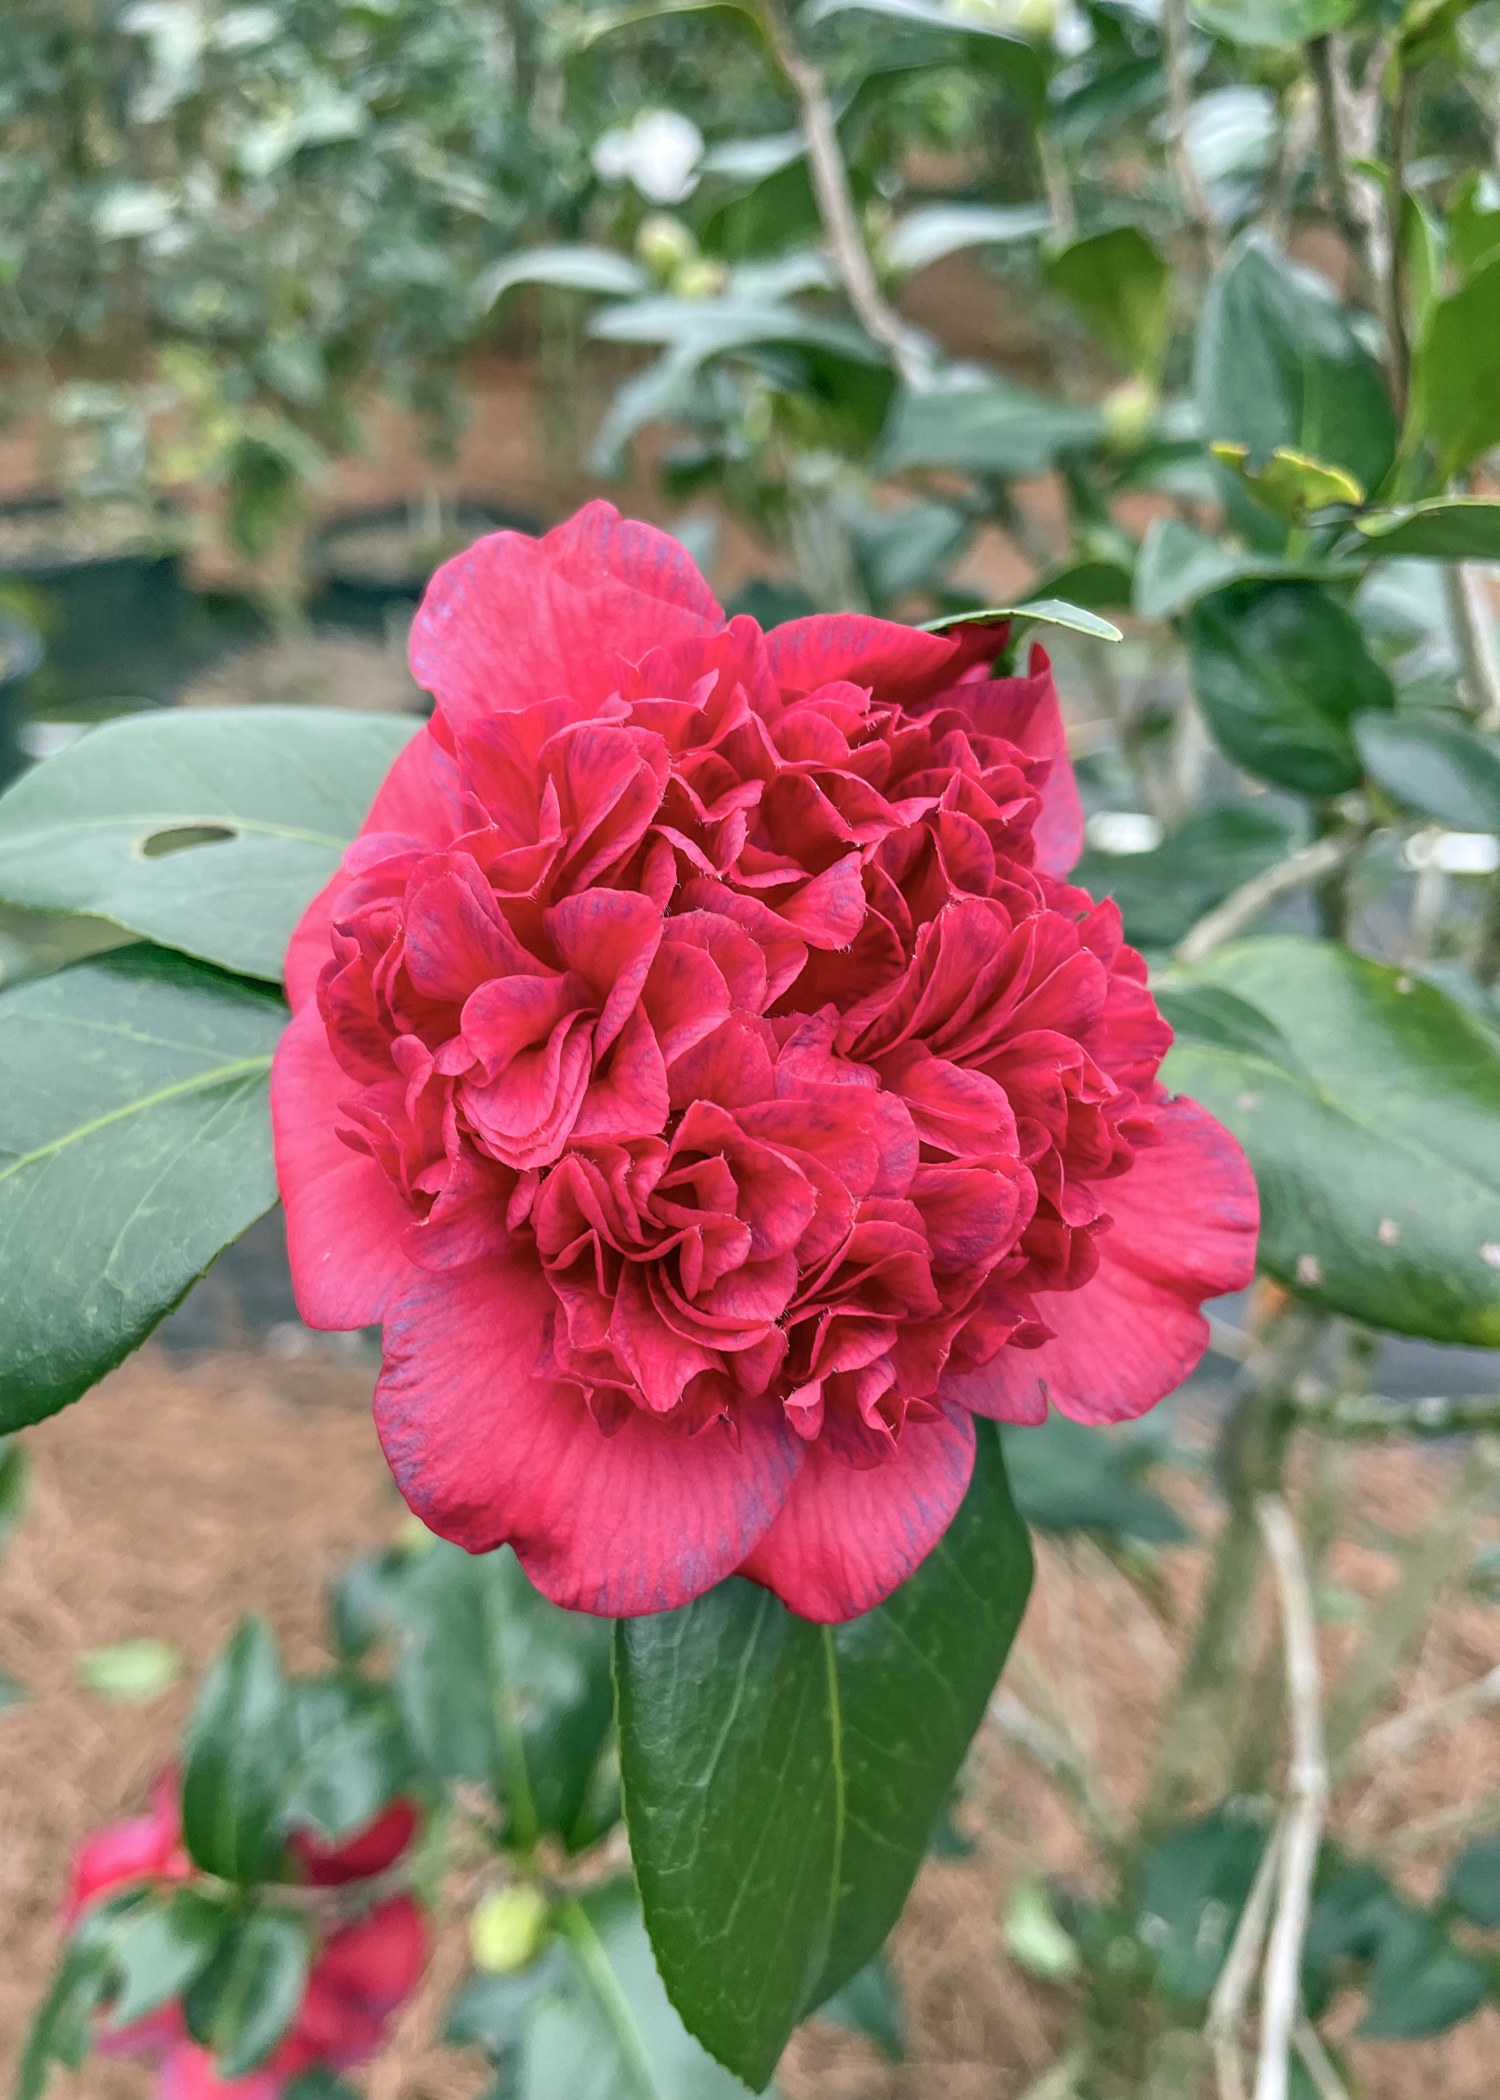 A single bloom is deep red and ruffled.